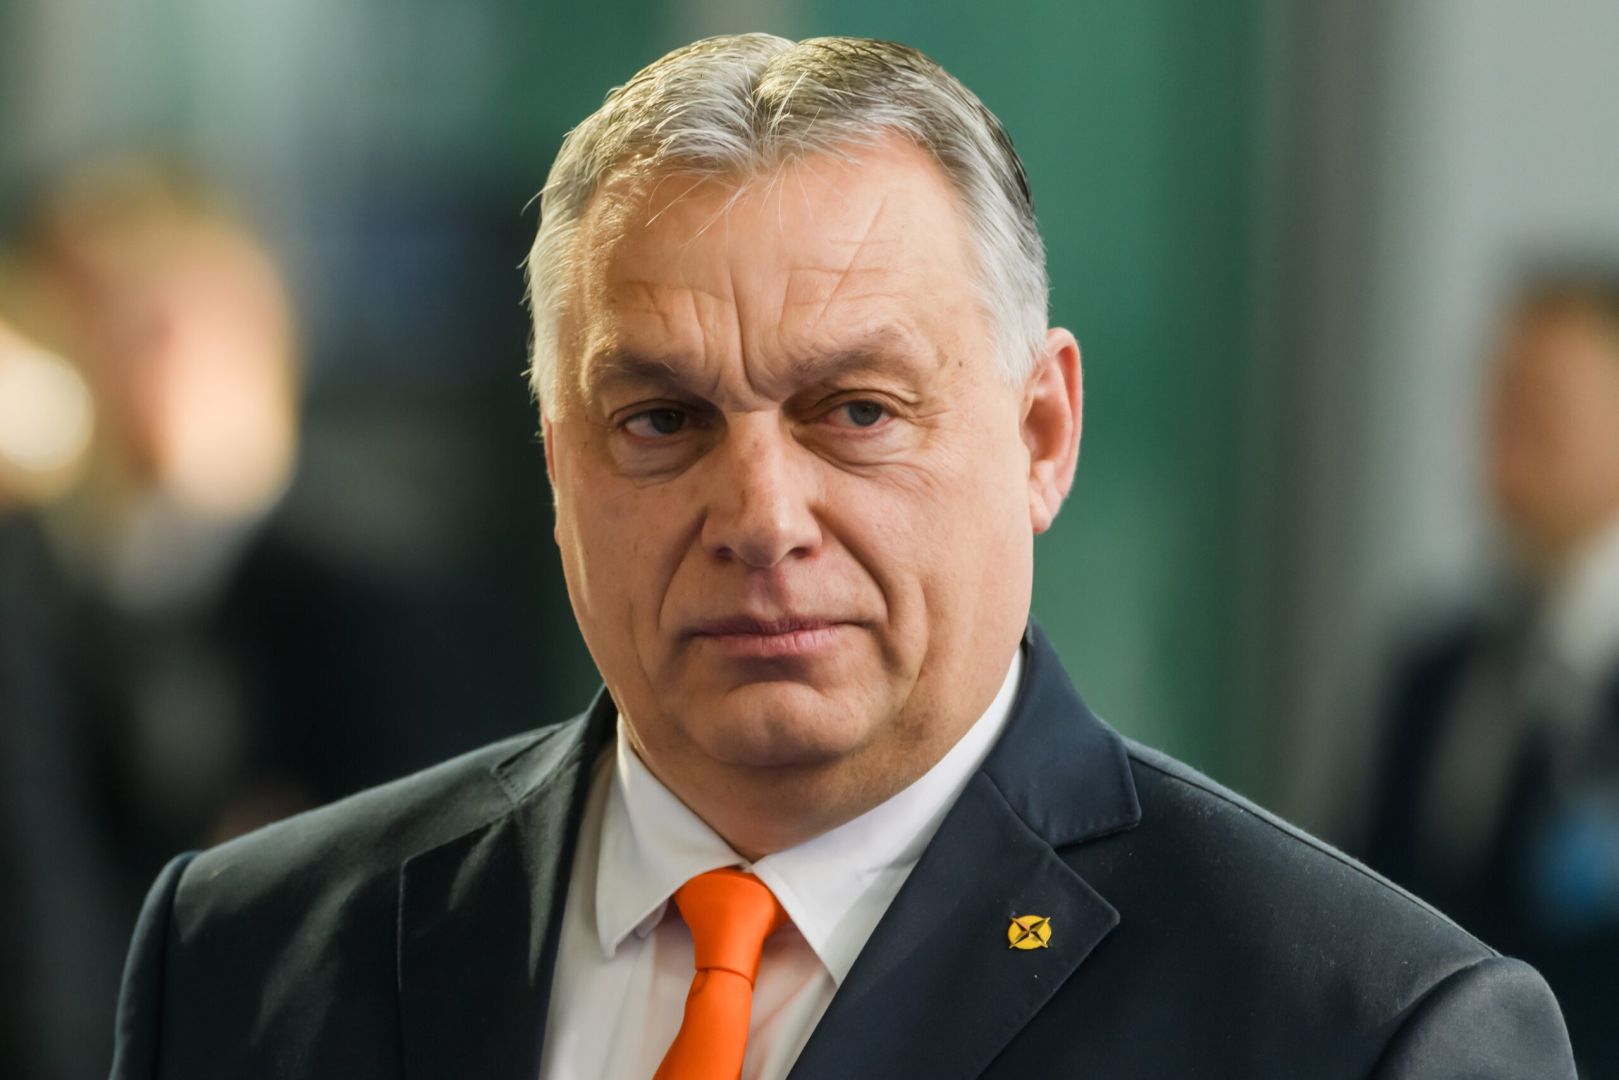 Hungary's Orban to meet with Trump instead of Biden in United States